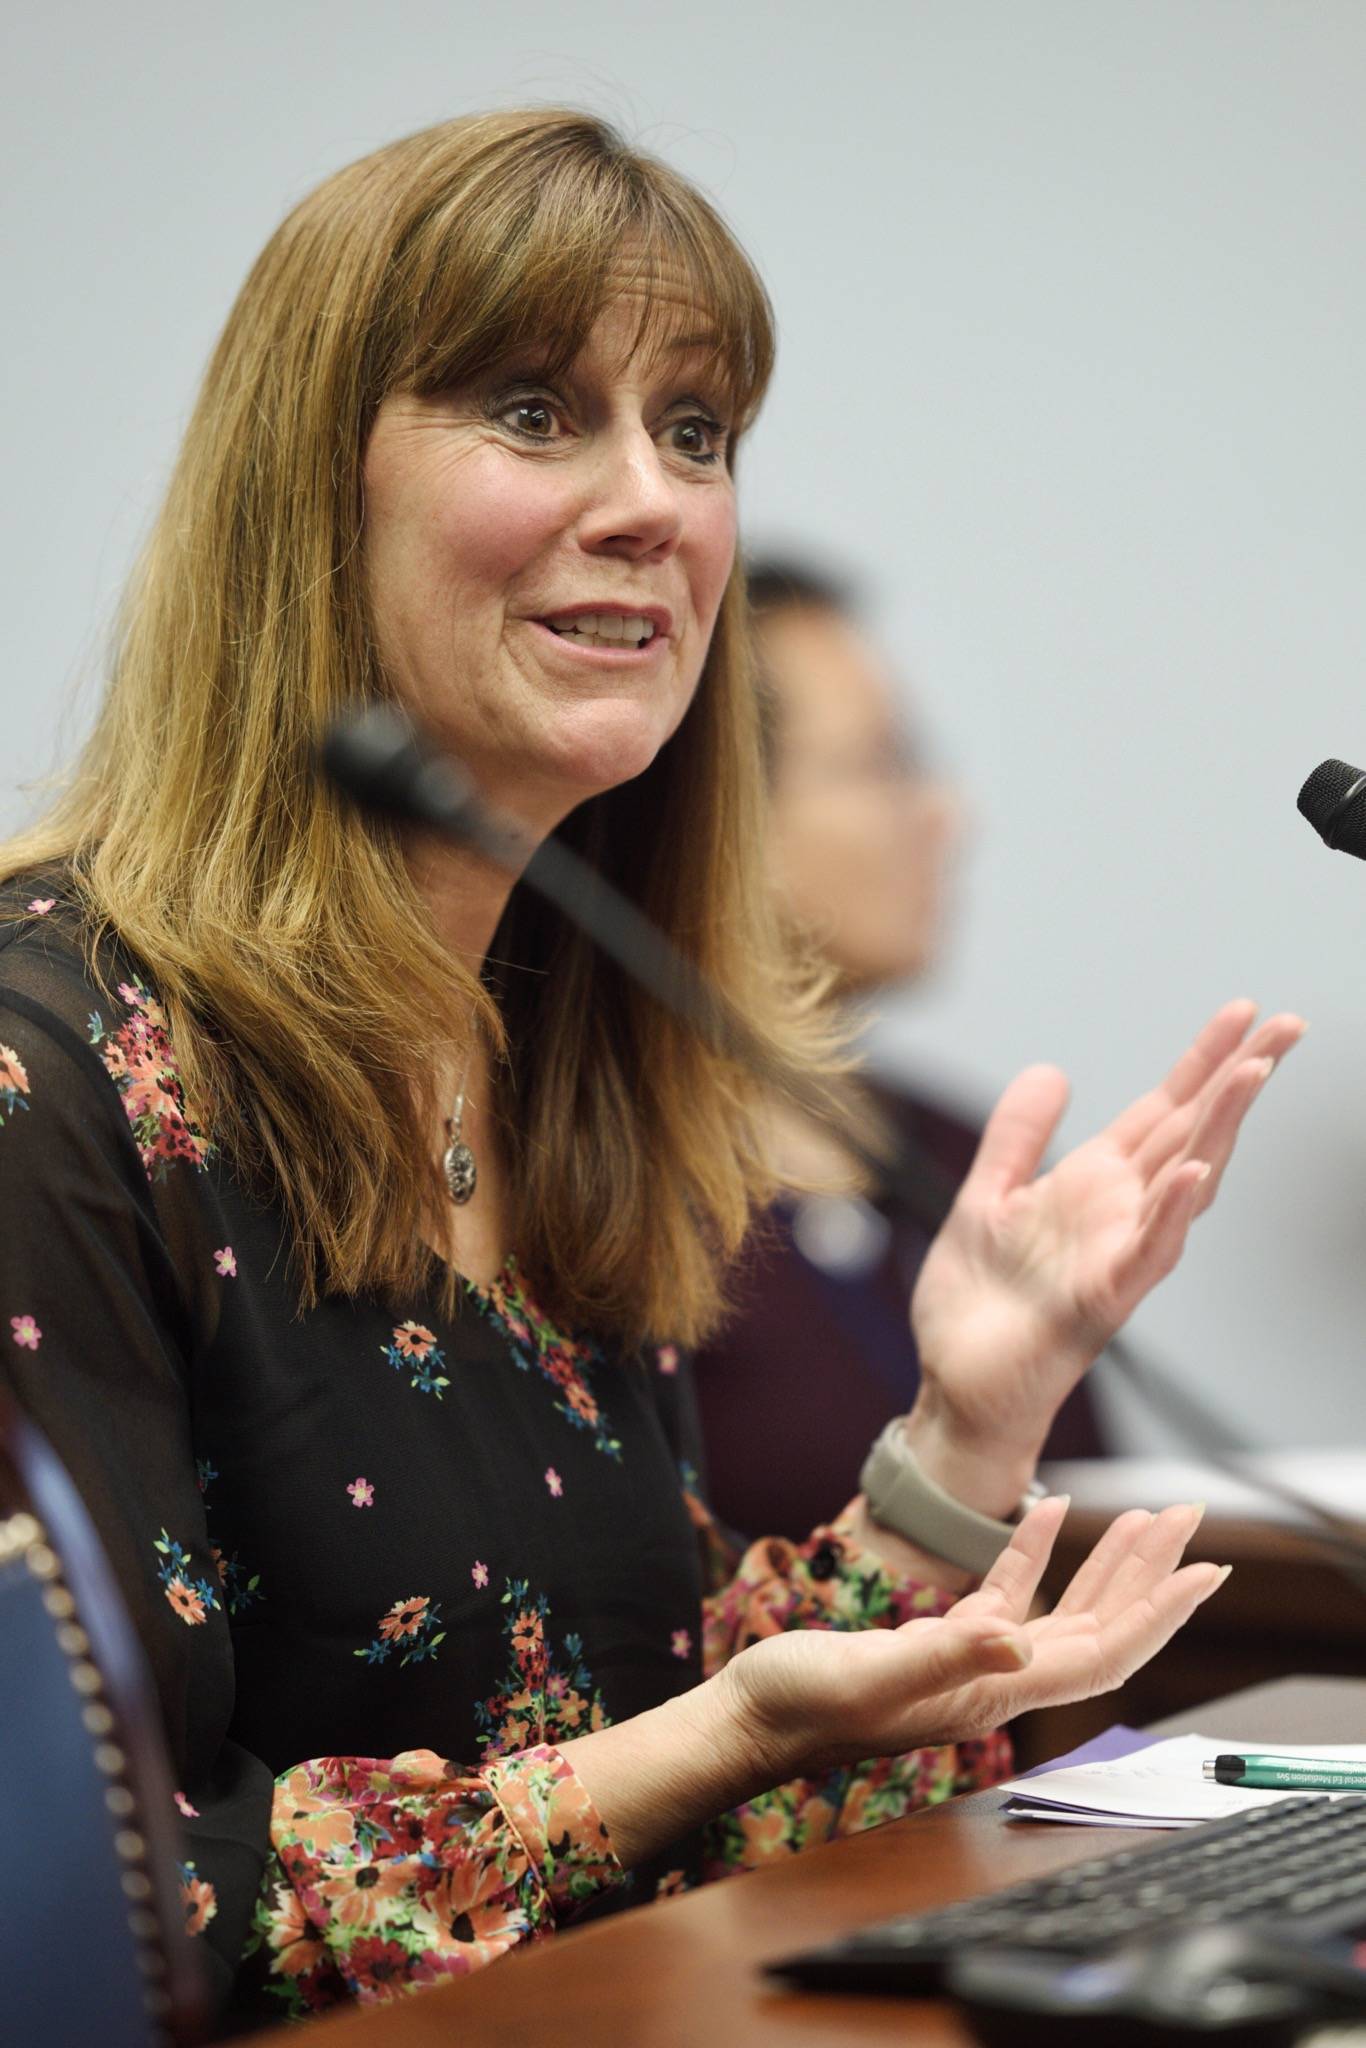 Bridget Weiss, superintendent of the Juneau School District, has been nominated for a Women of Distinction award. She is pictured here addressing the Senate Education Committee at the Capitol on April 16, 2019. (Michael Penn/Juneau Empire File)